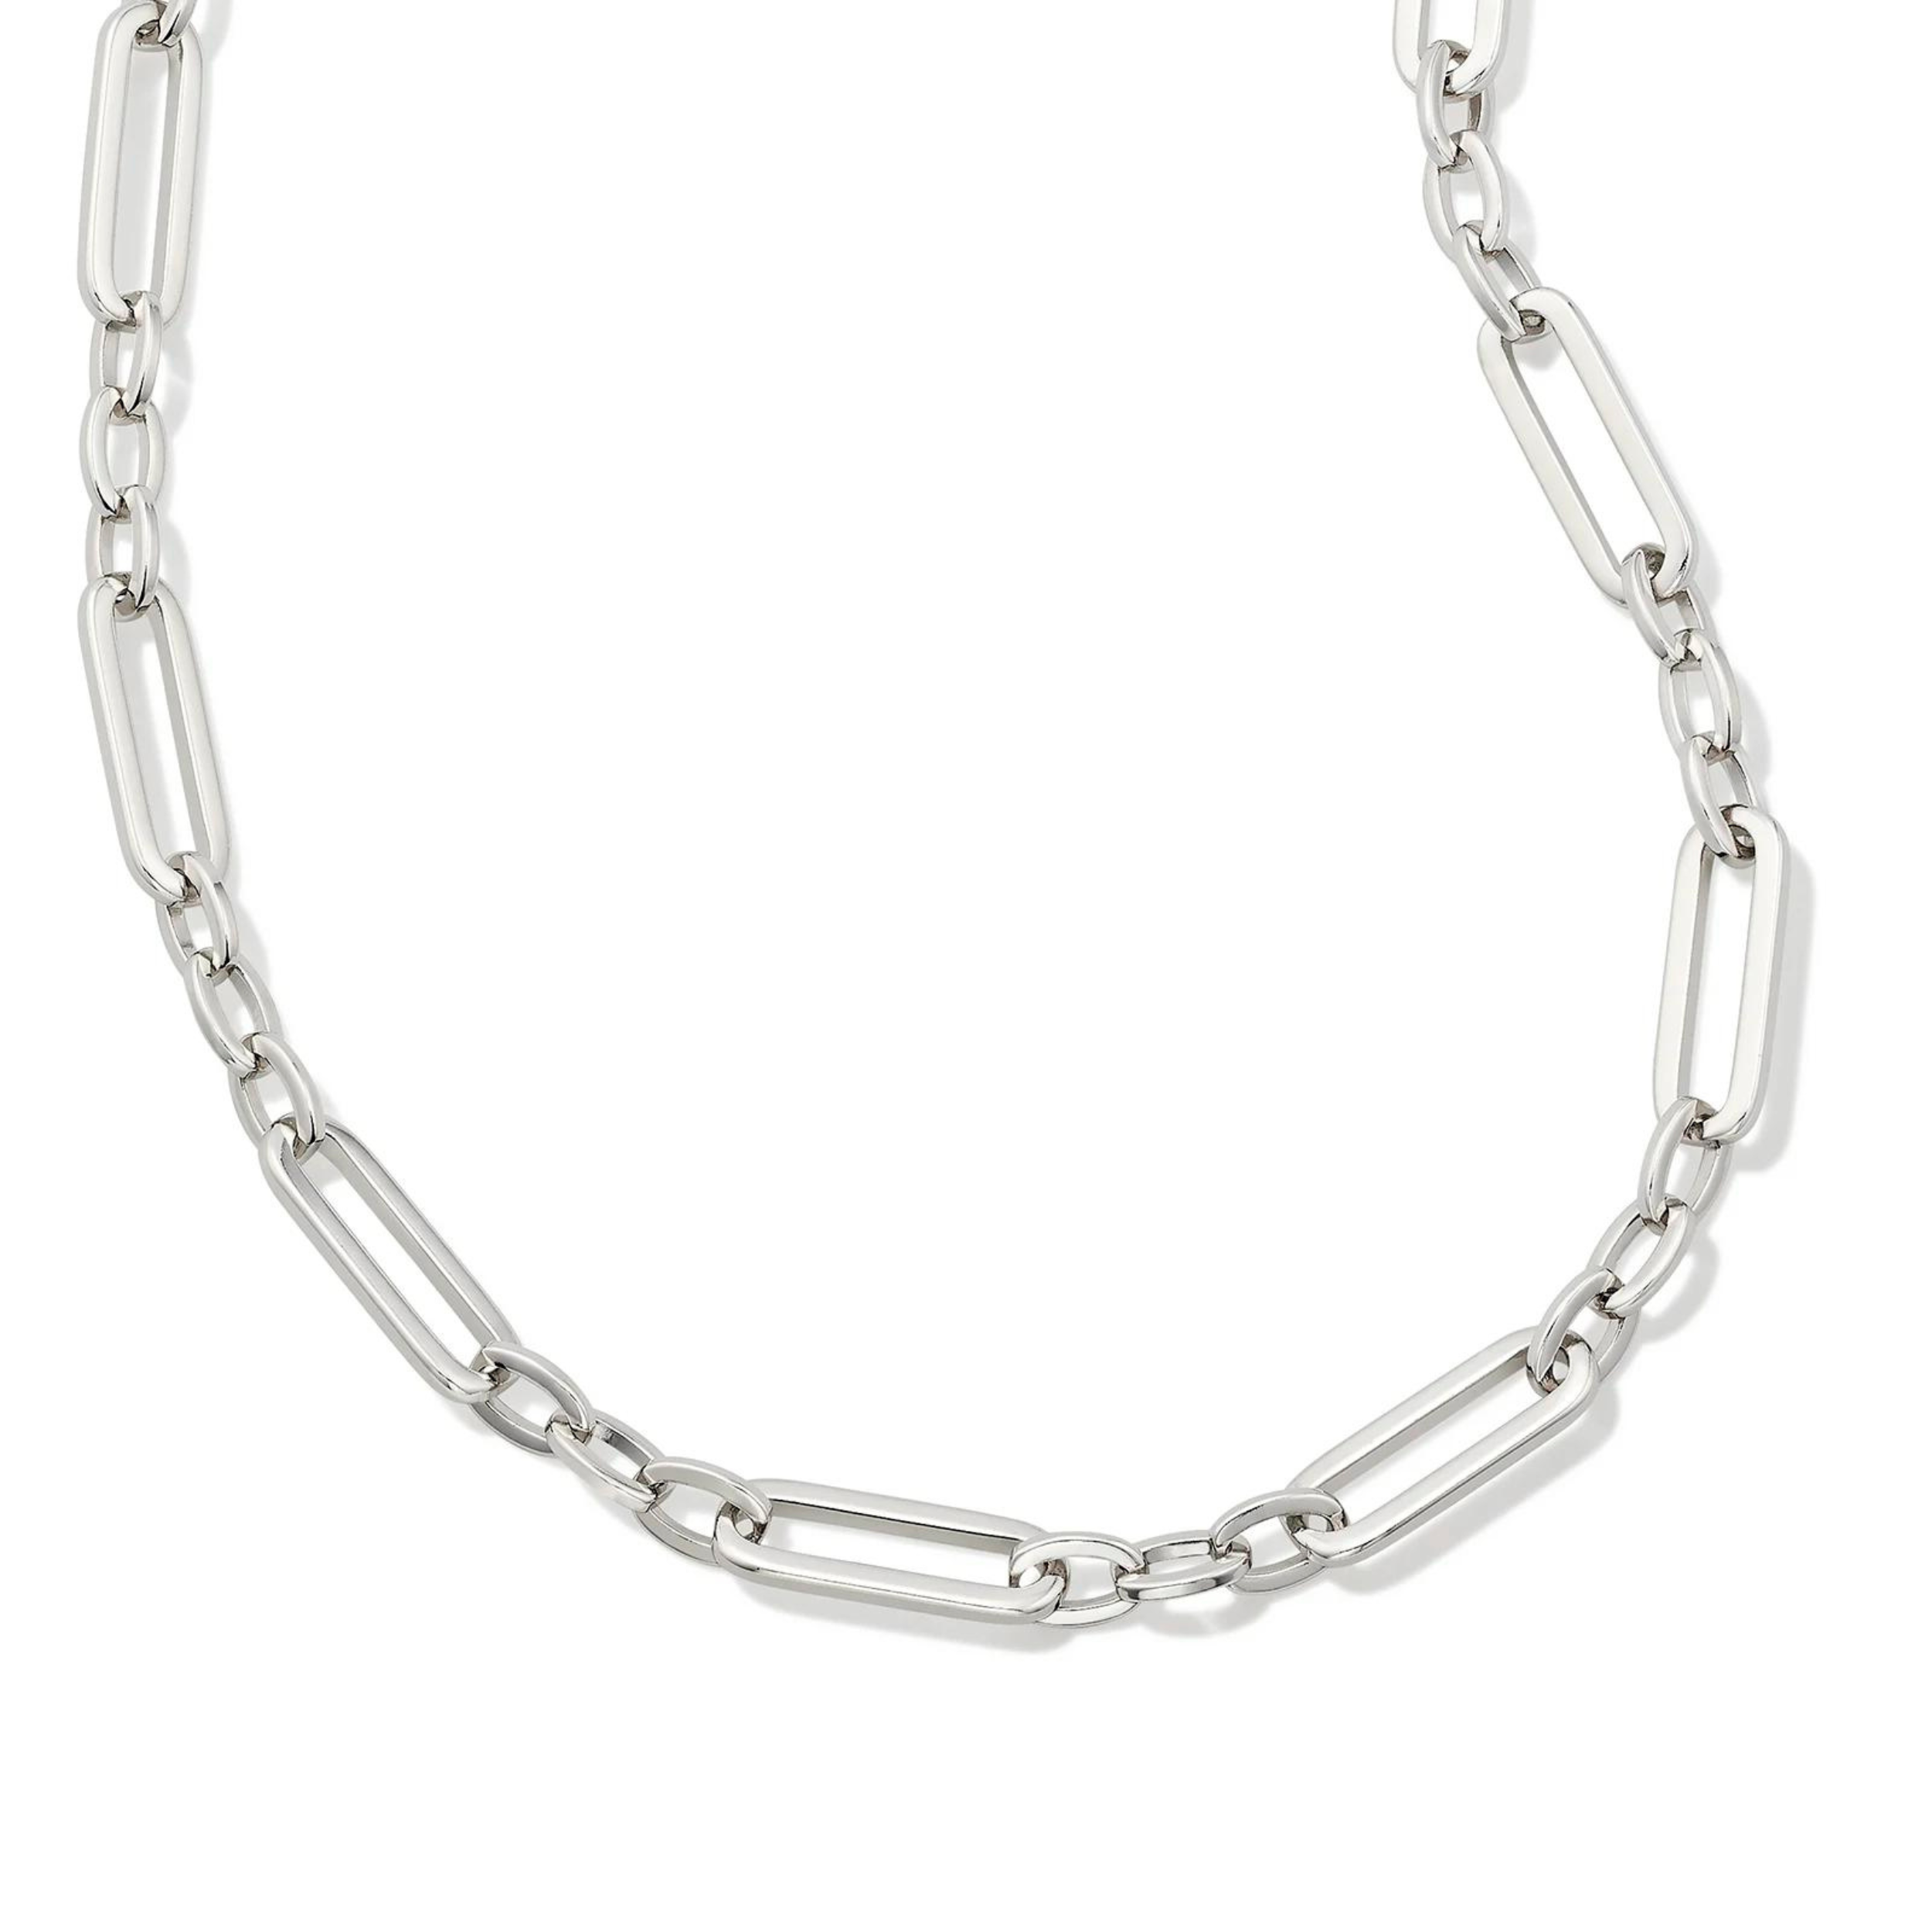 Pictured is a silver chain link necklace on a white background. 